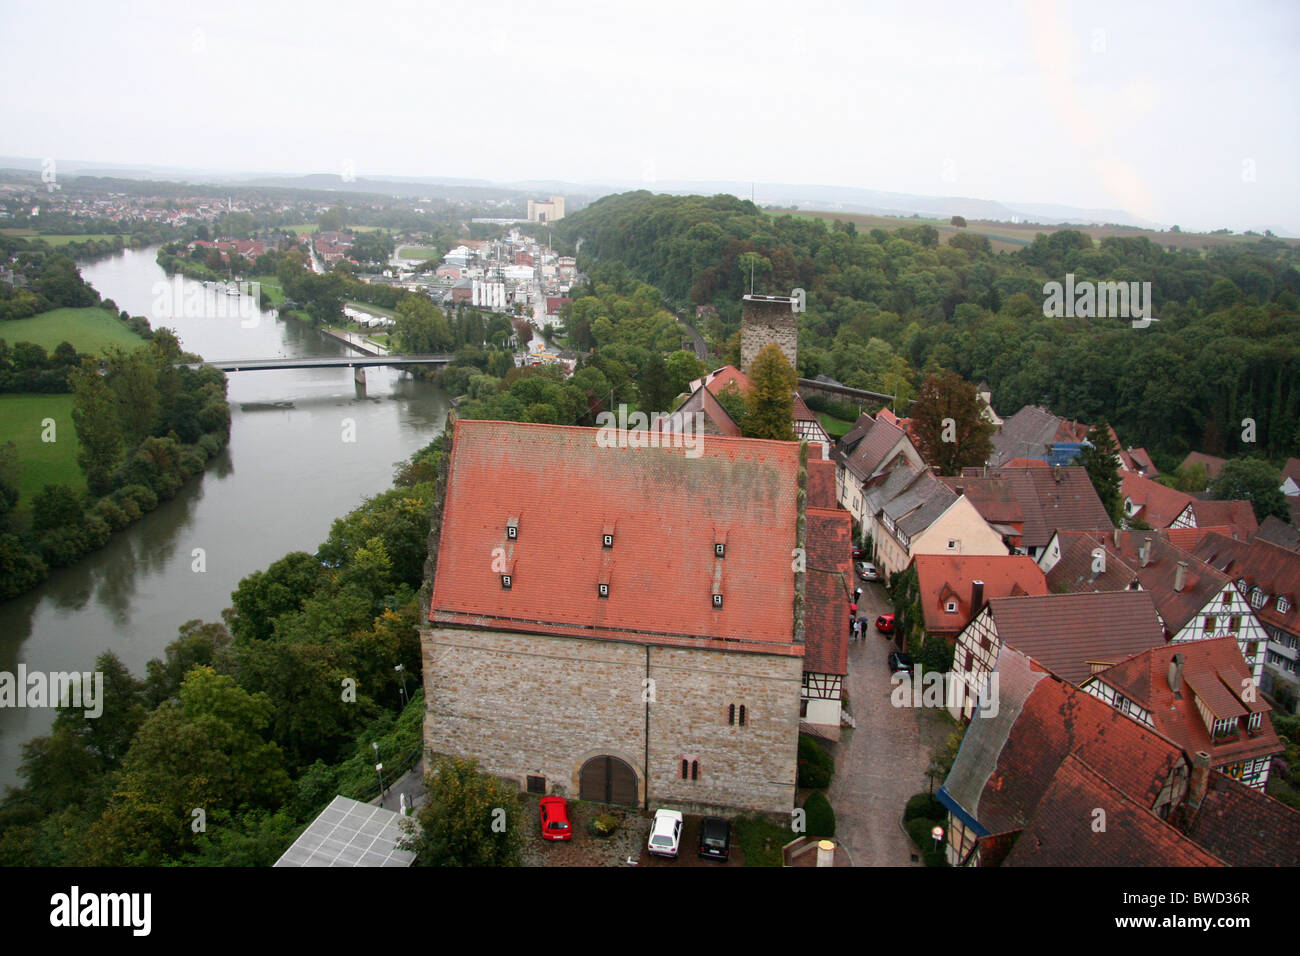 View over the river and rooftops of Bad Wimpfen, from the Blauer Turm, Blue Tower, Germany Stock Photo